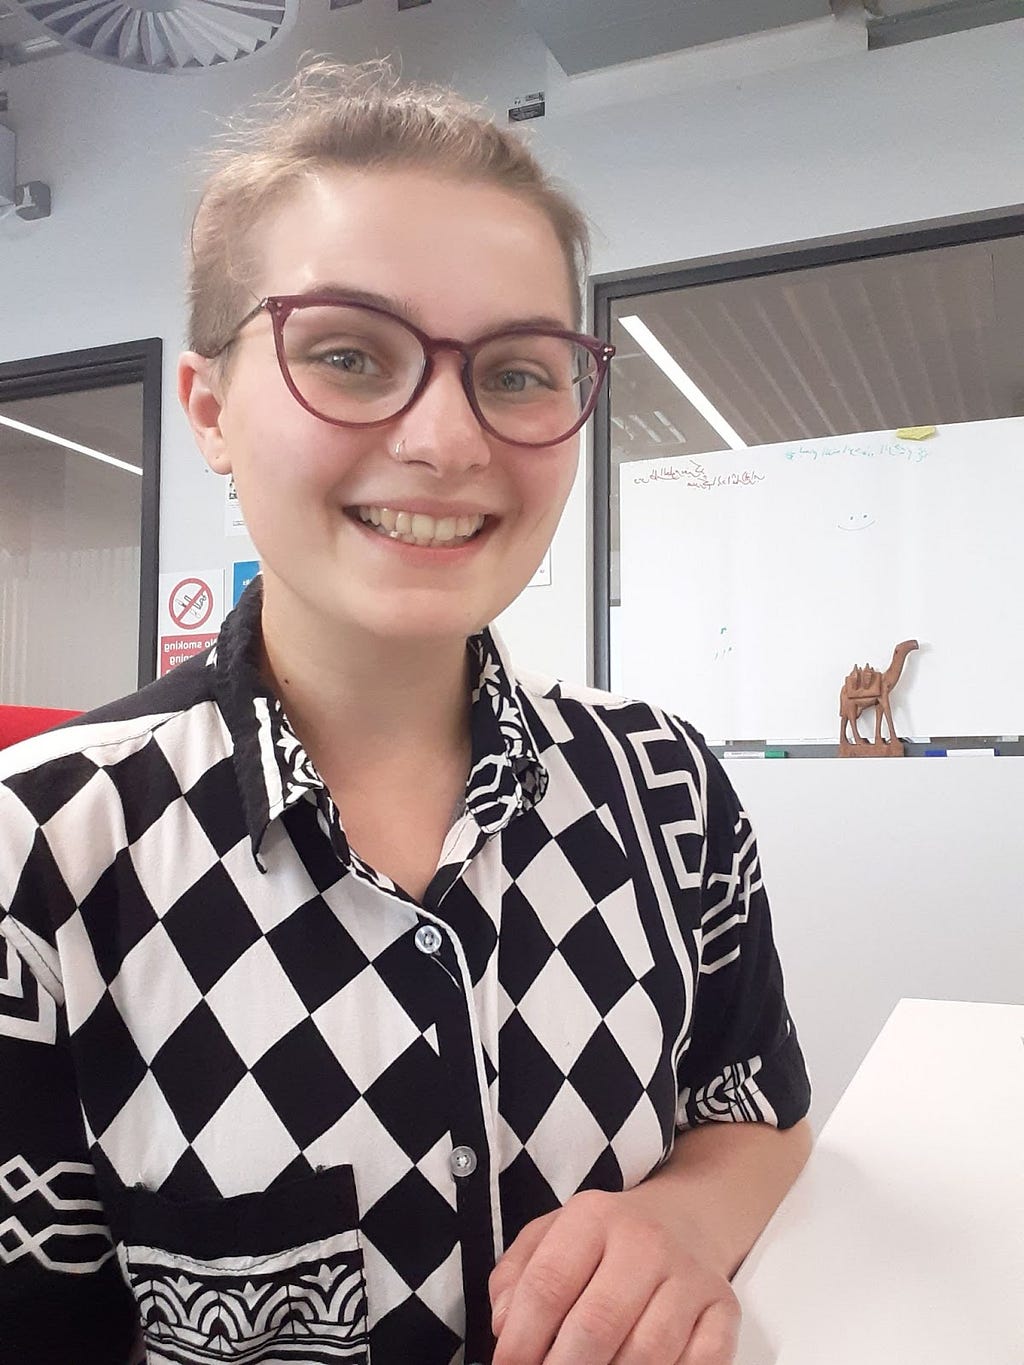 a person with short hair, glasses and a black and white checked shirt